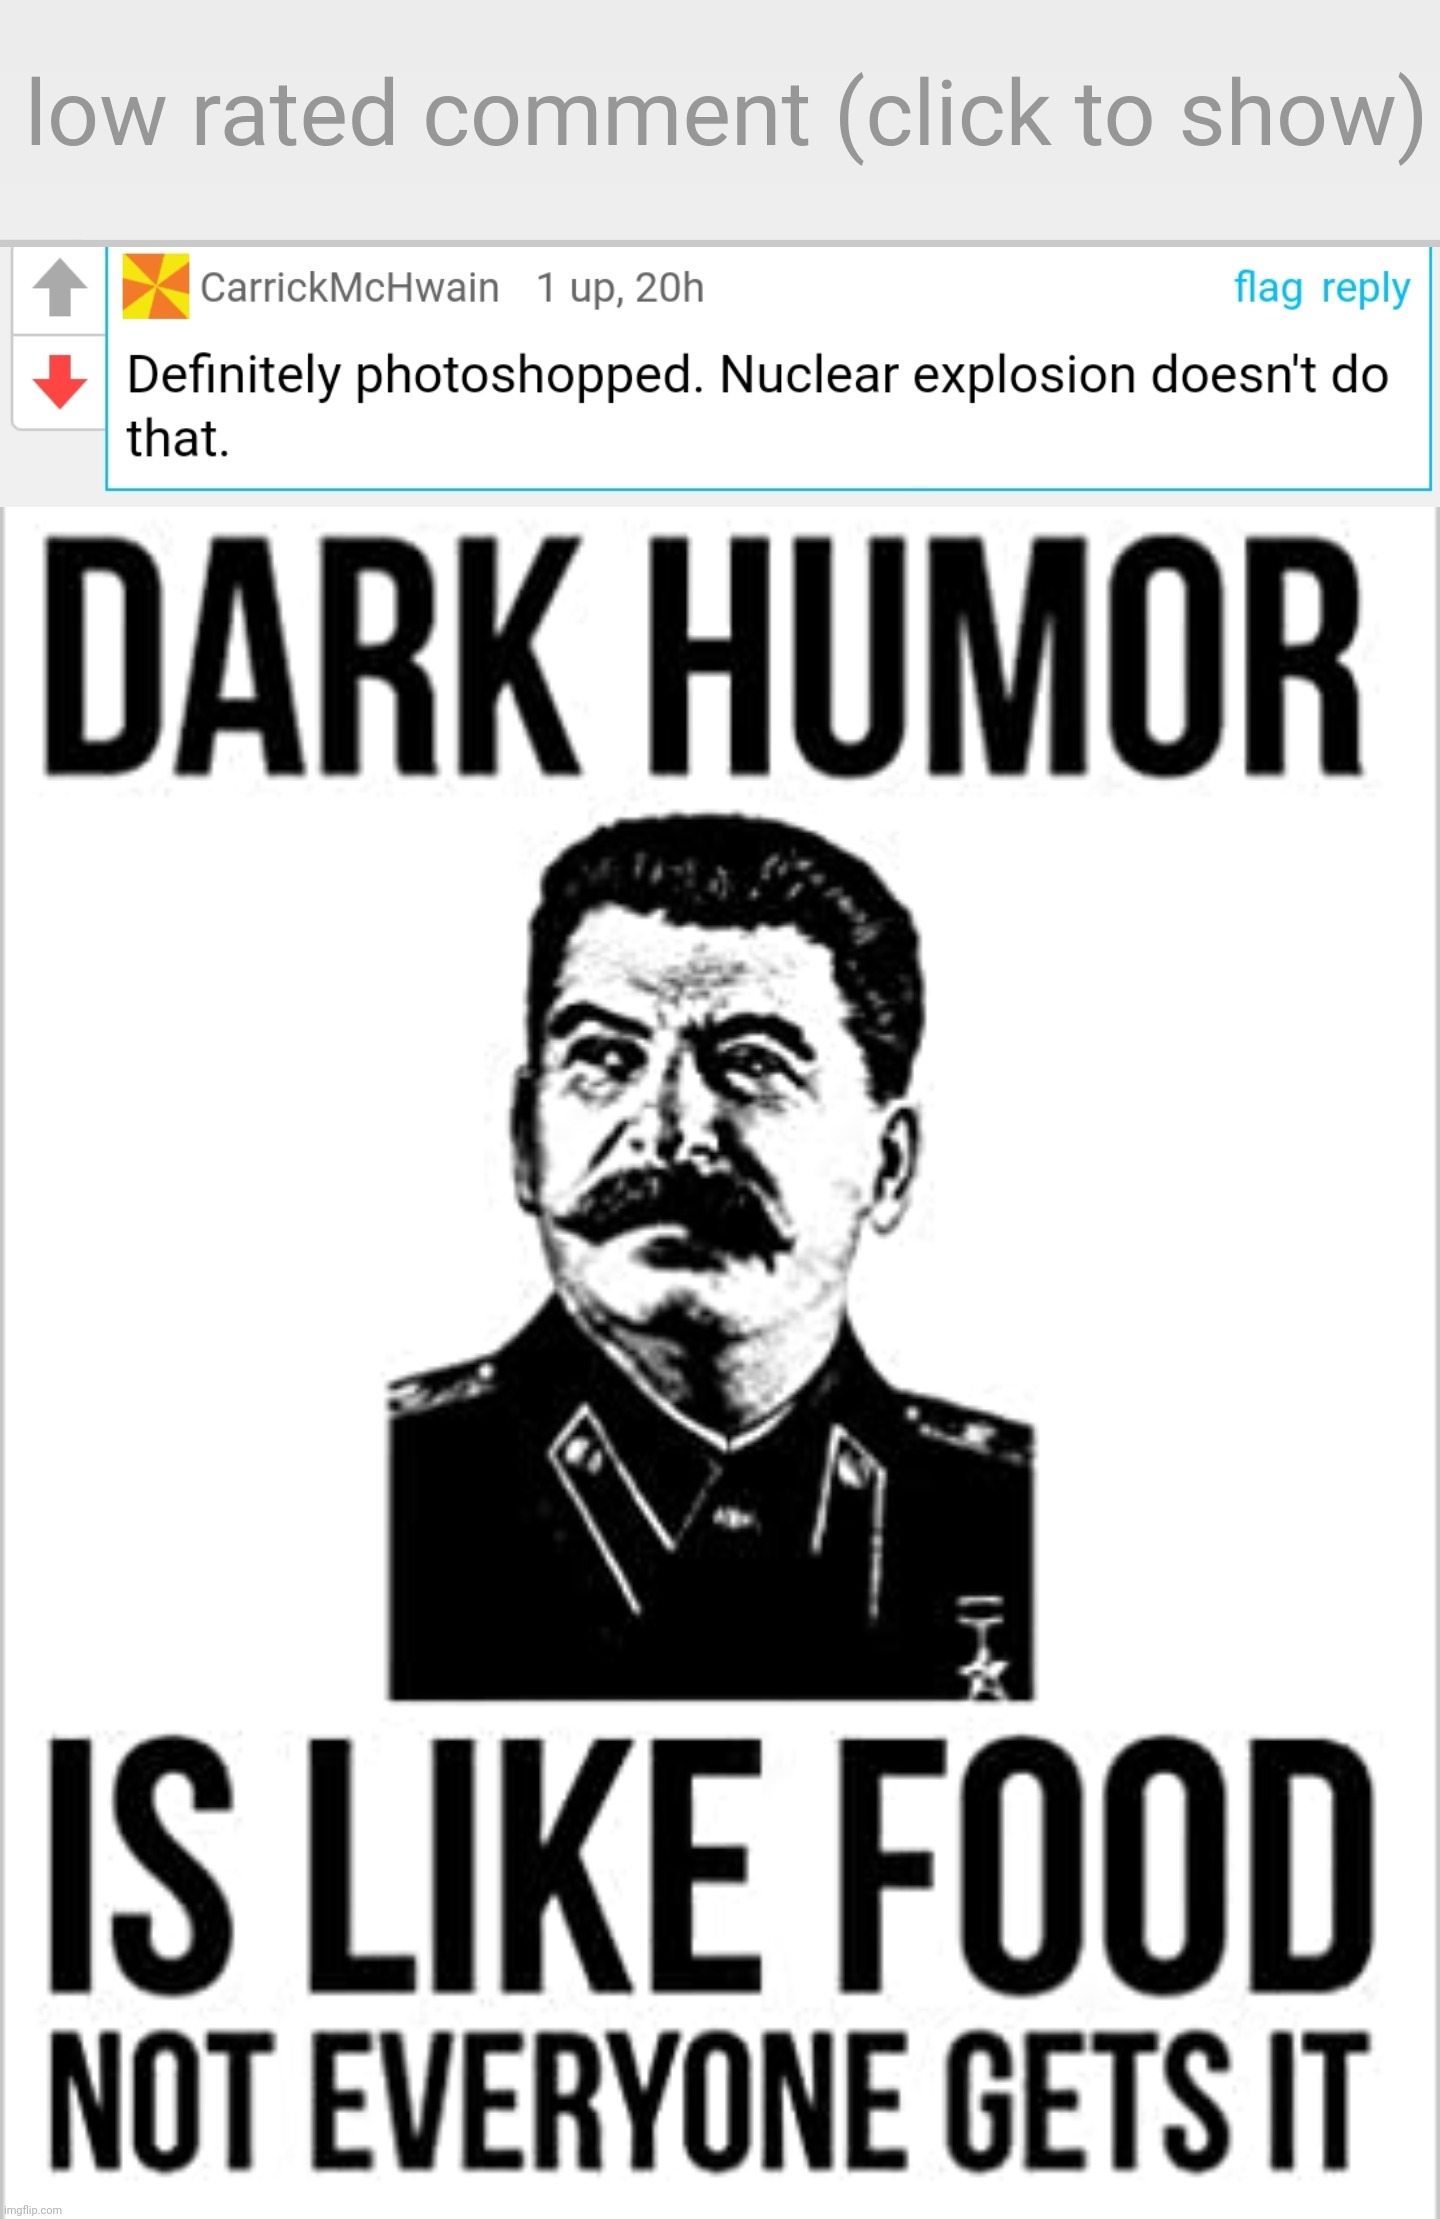 Why do they have to ruin the joke? | image tagged in low-rated comment imgflip,dark humor is like food not everyone gets it | made w/ Imgflip meme maker